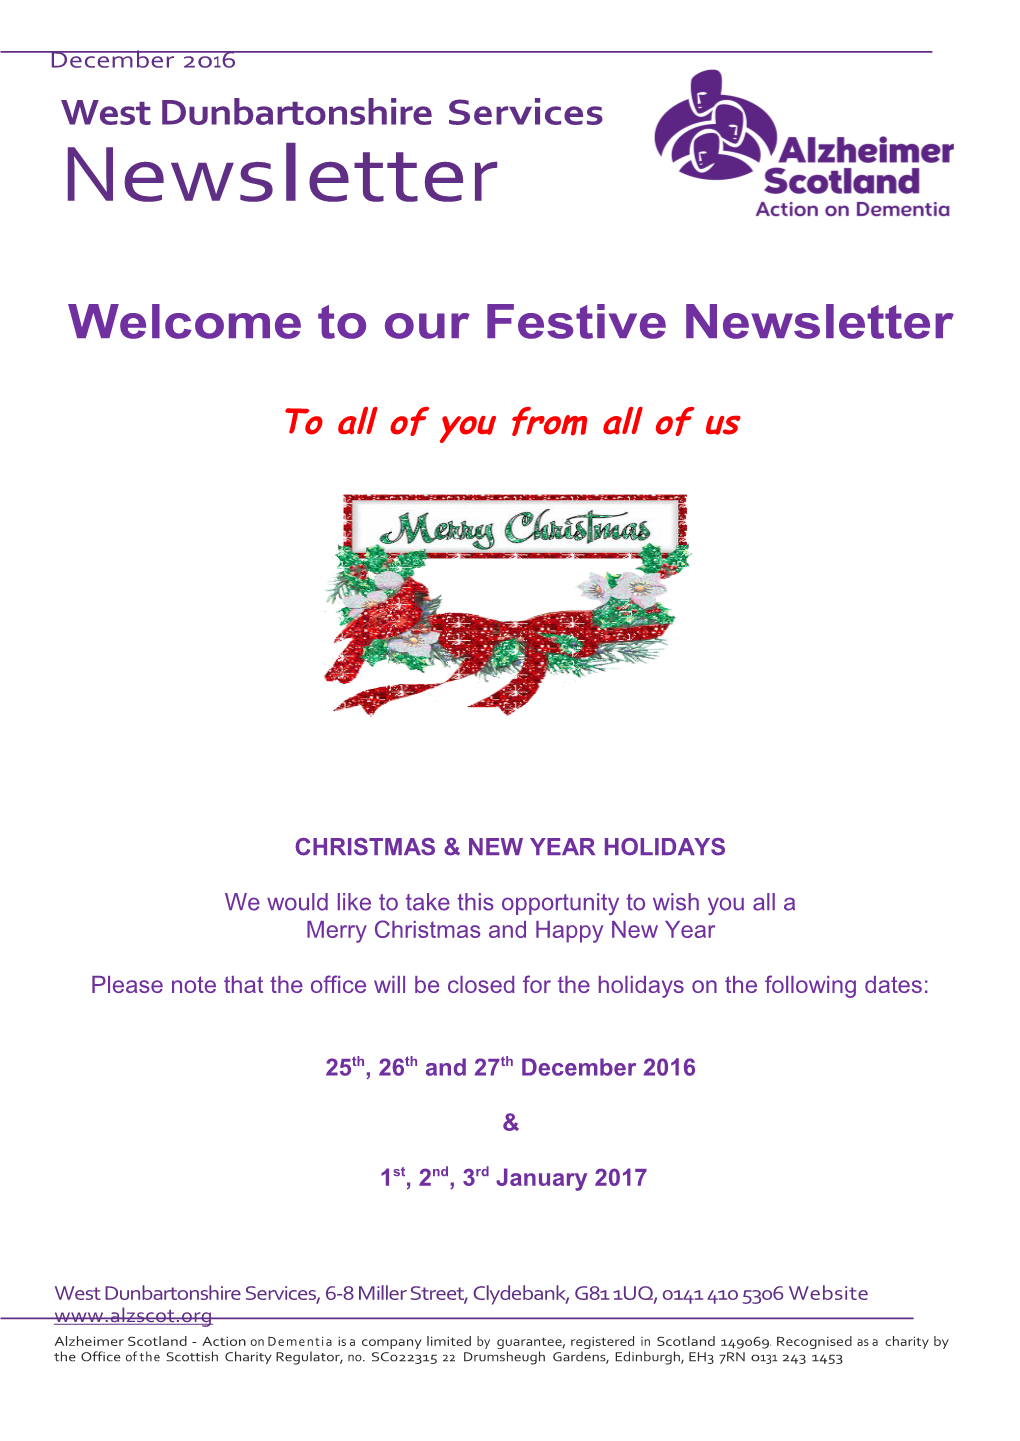 Welcome to Our Festive Newsletter